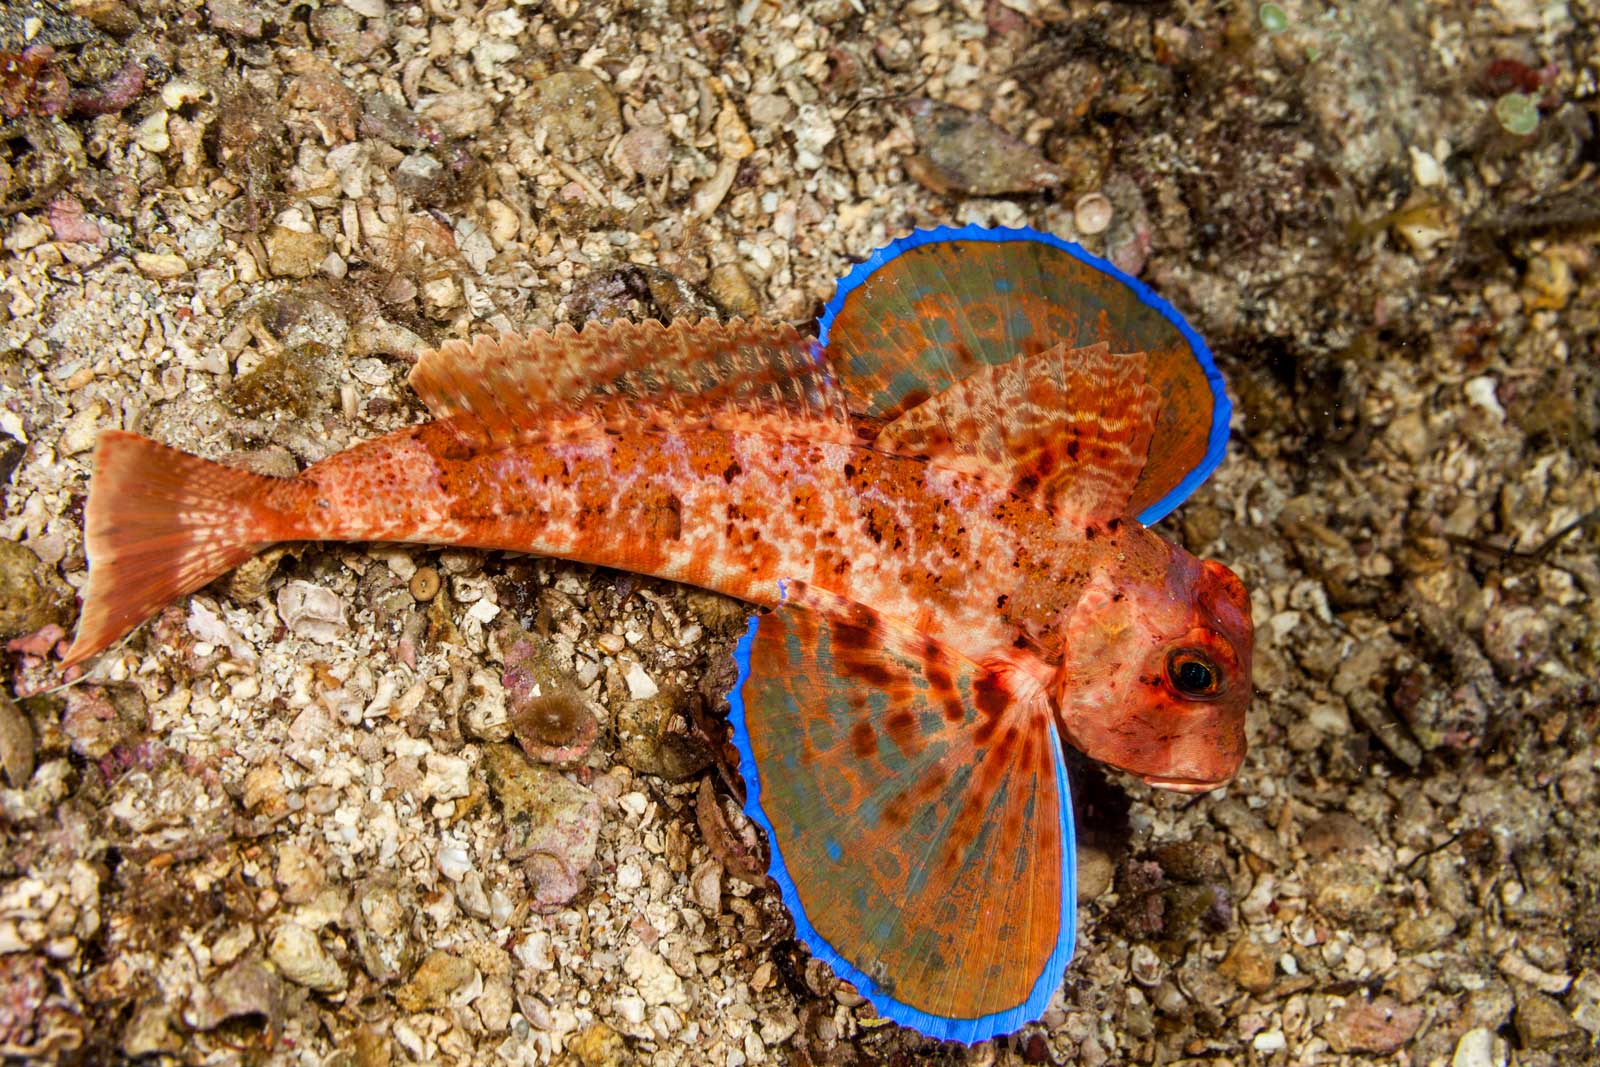 The Sea Robin photographed laying on the seabed. Orange in colour with fins that span out on either side like wings, the edges of which are an electric blue.